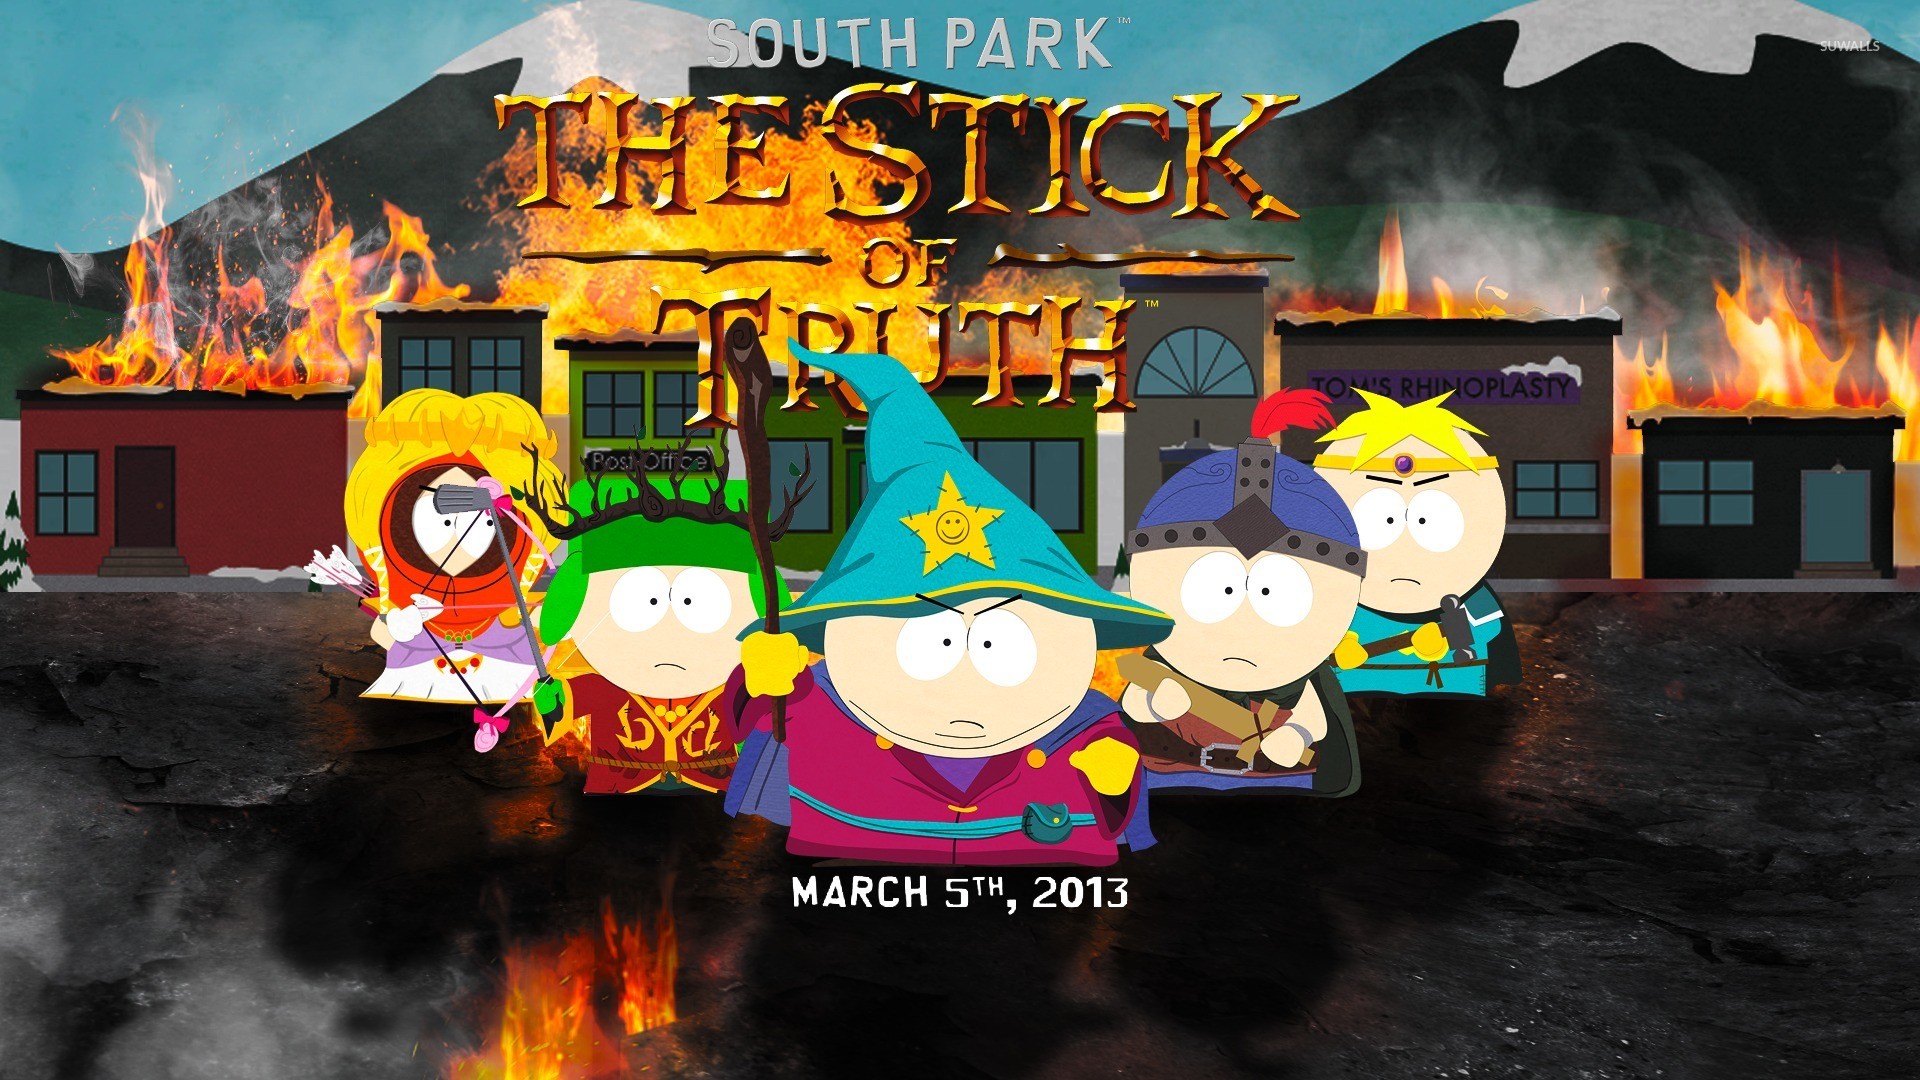 1920x1080 South Park - The Stick of Truth wallpaper  jpg